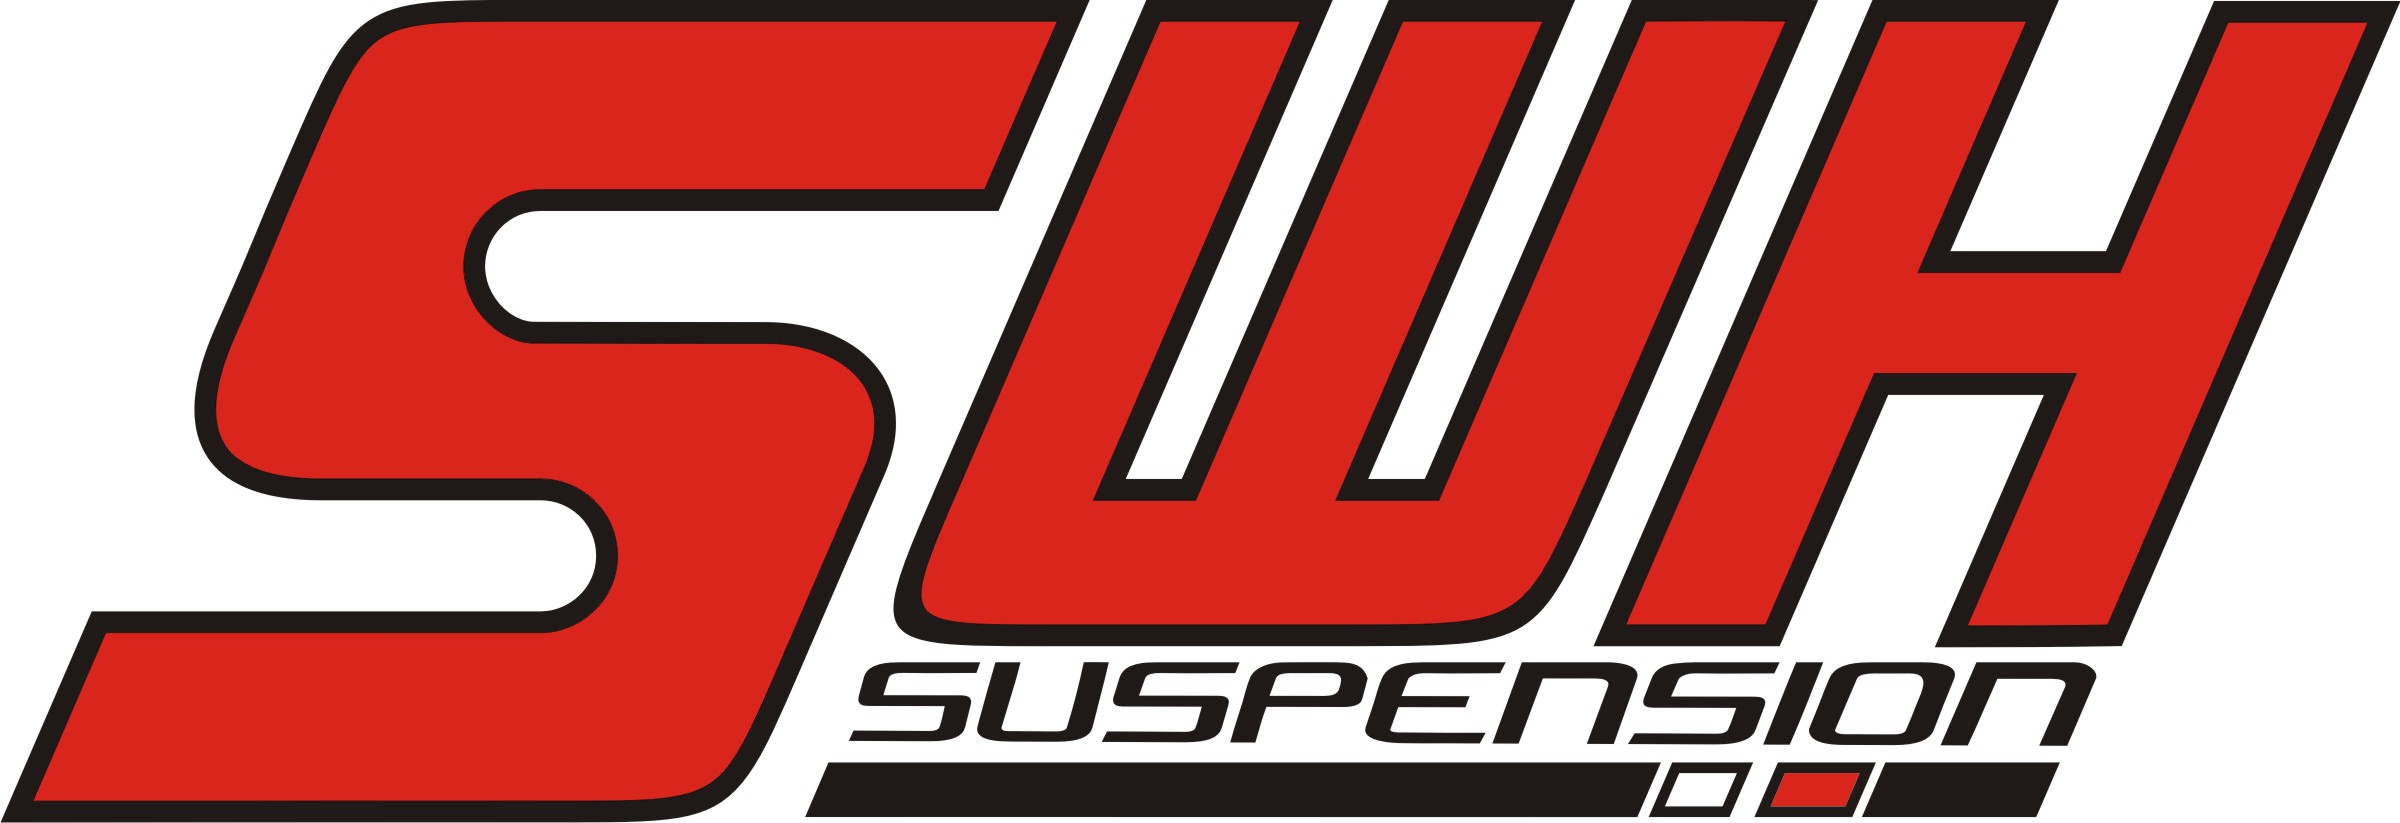 SWH-Suspension_rot